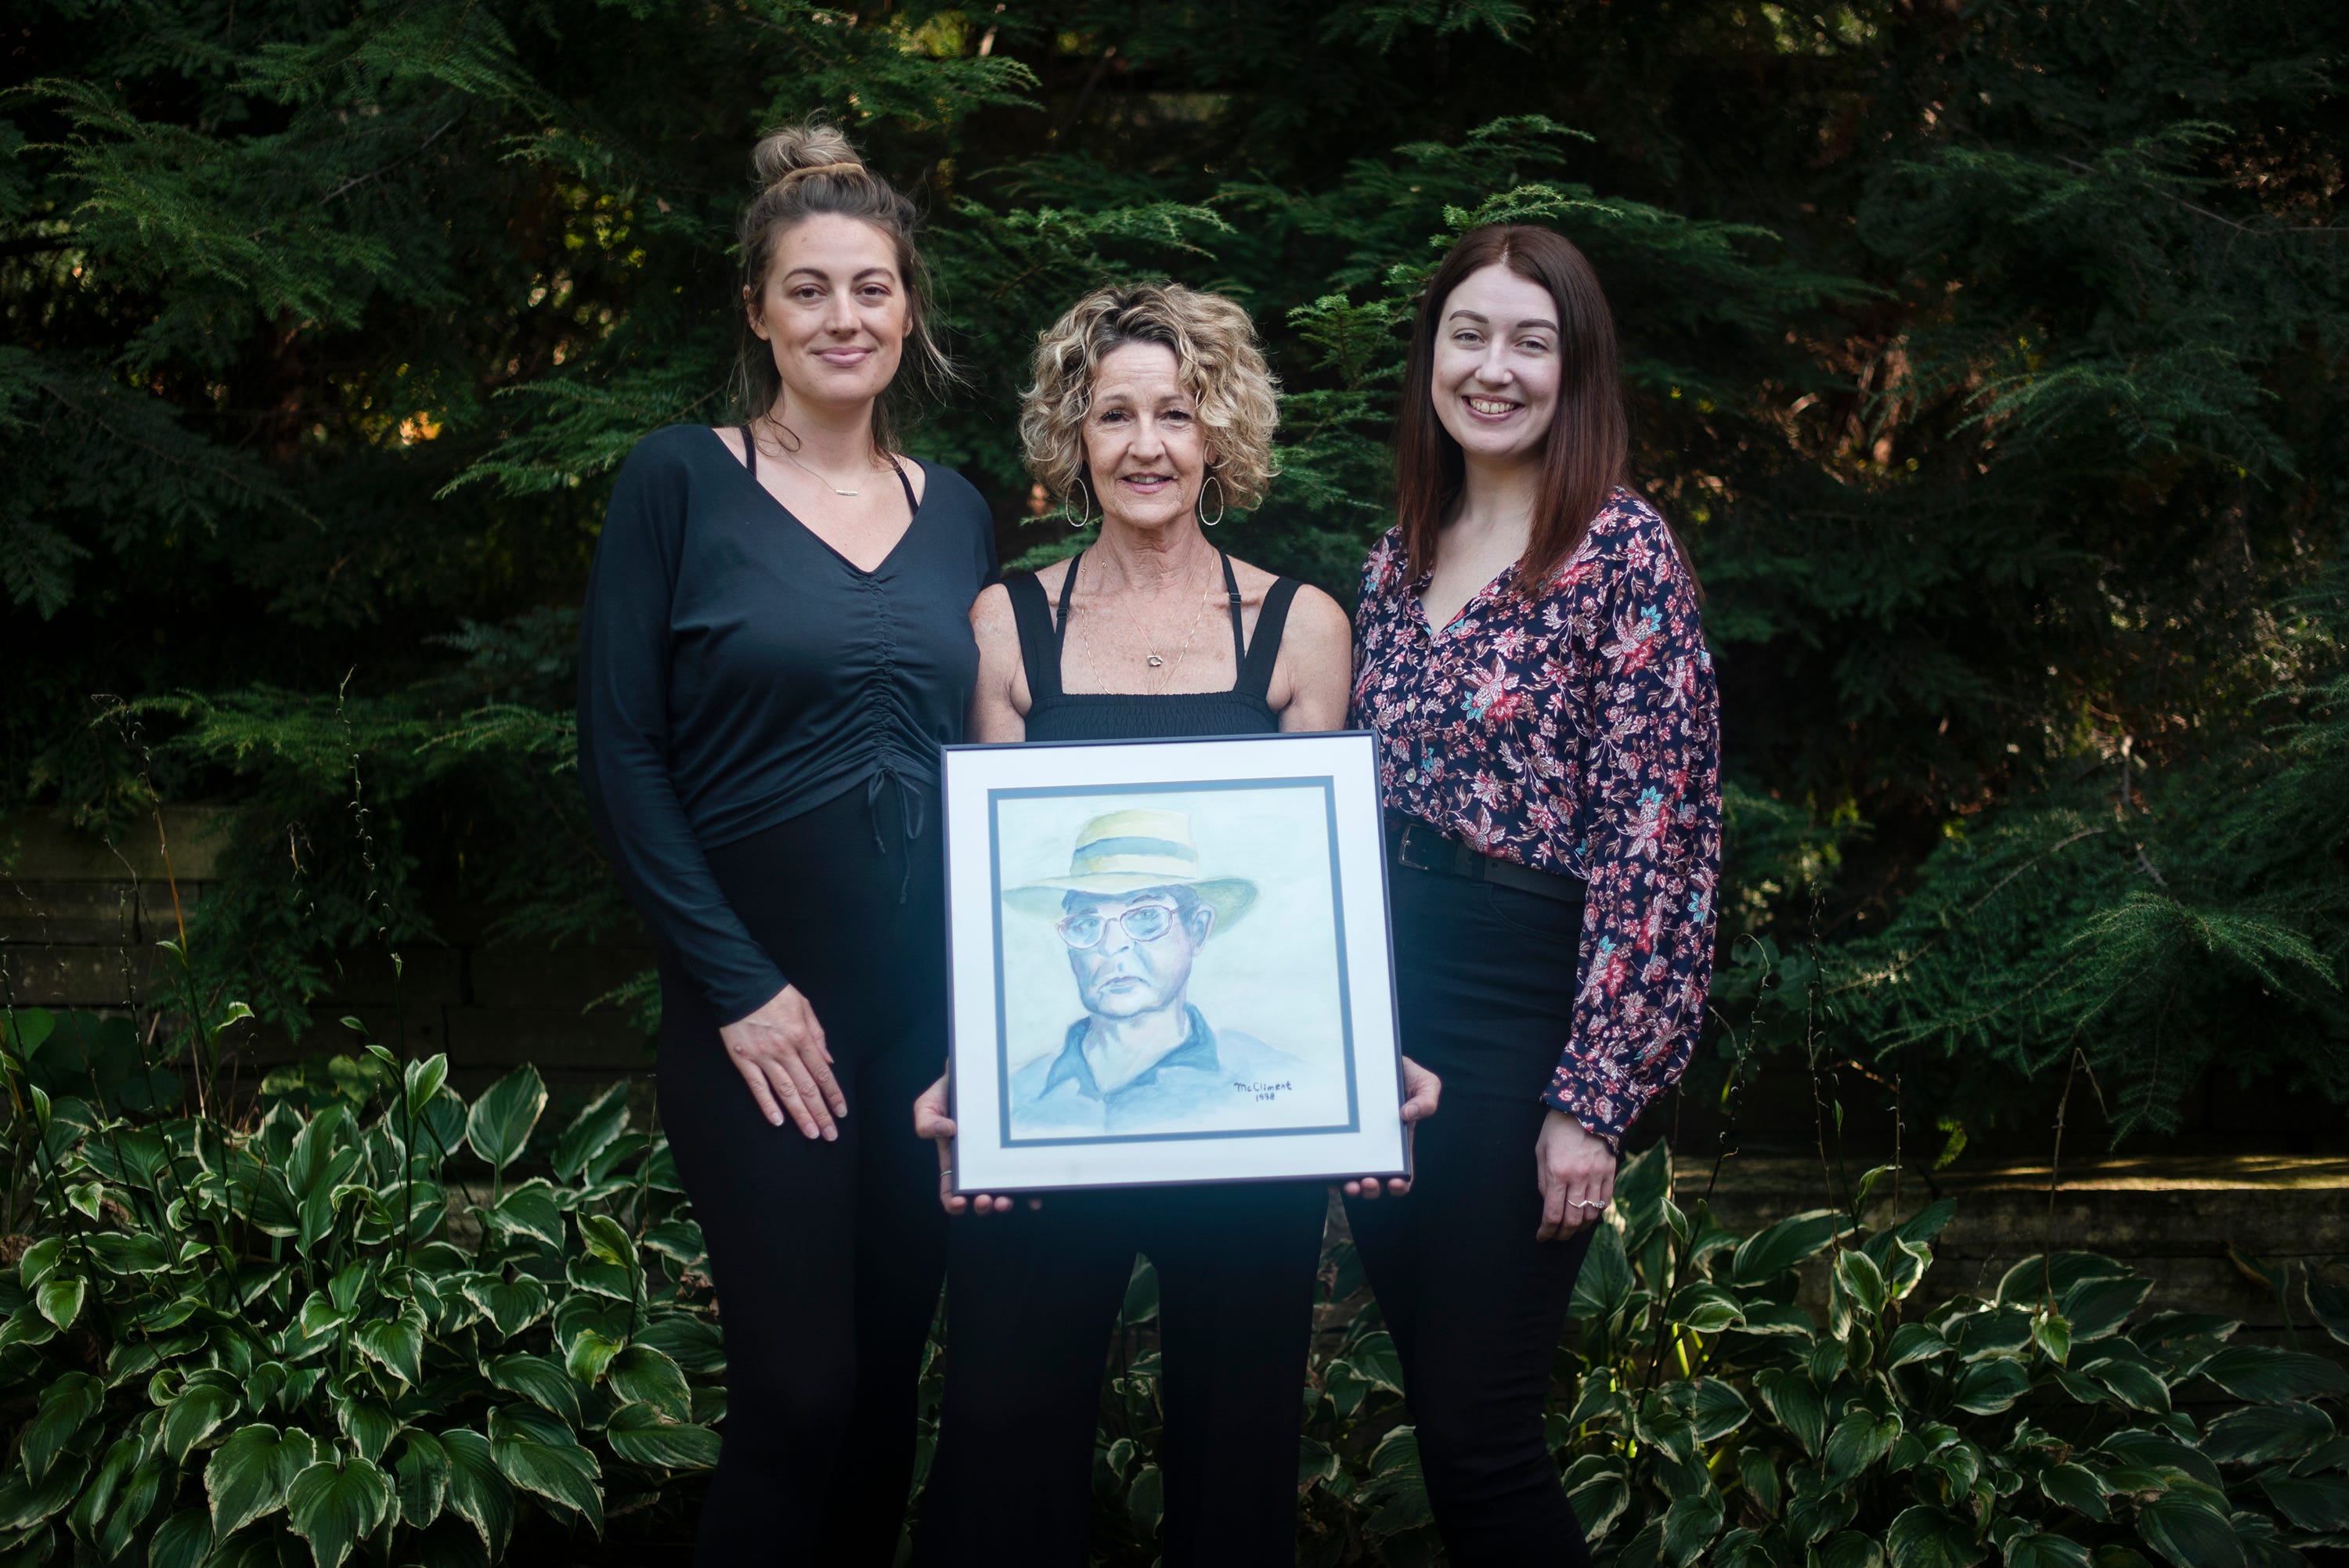 Ed McCliment's daughter Nancy Korpela, center, holding his portrait, and his granddaughters Hannah Landa and Hillary Korpela pose for a photo.